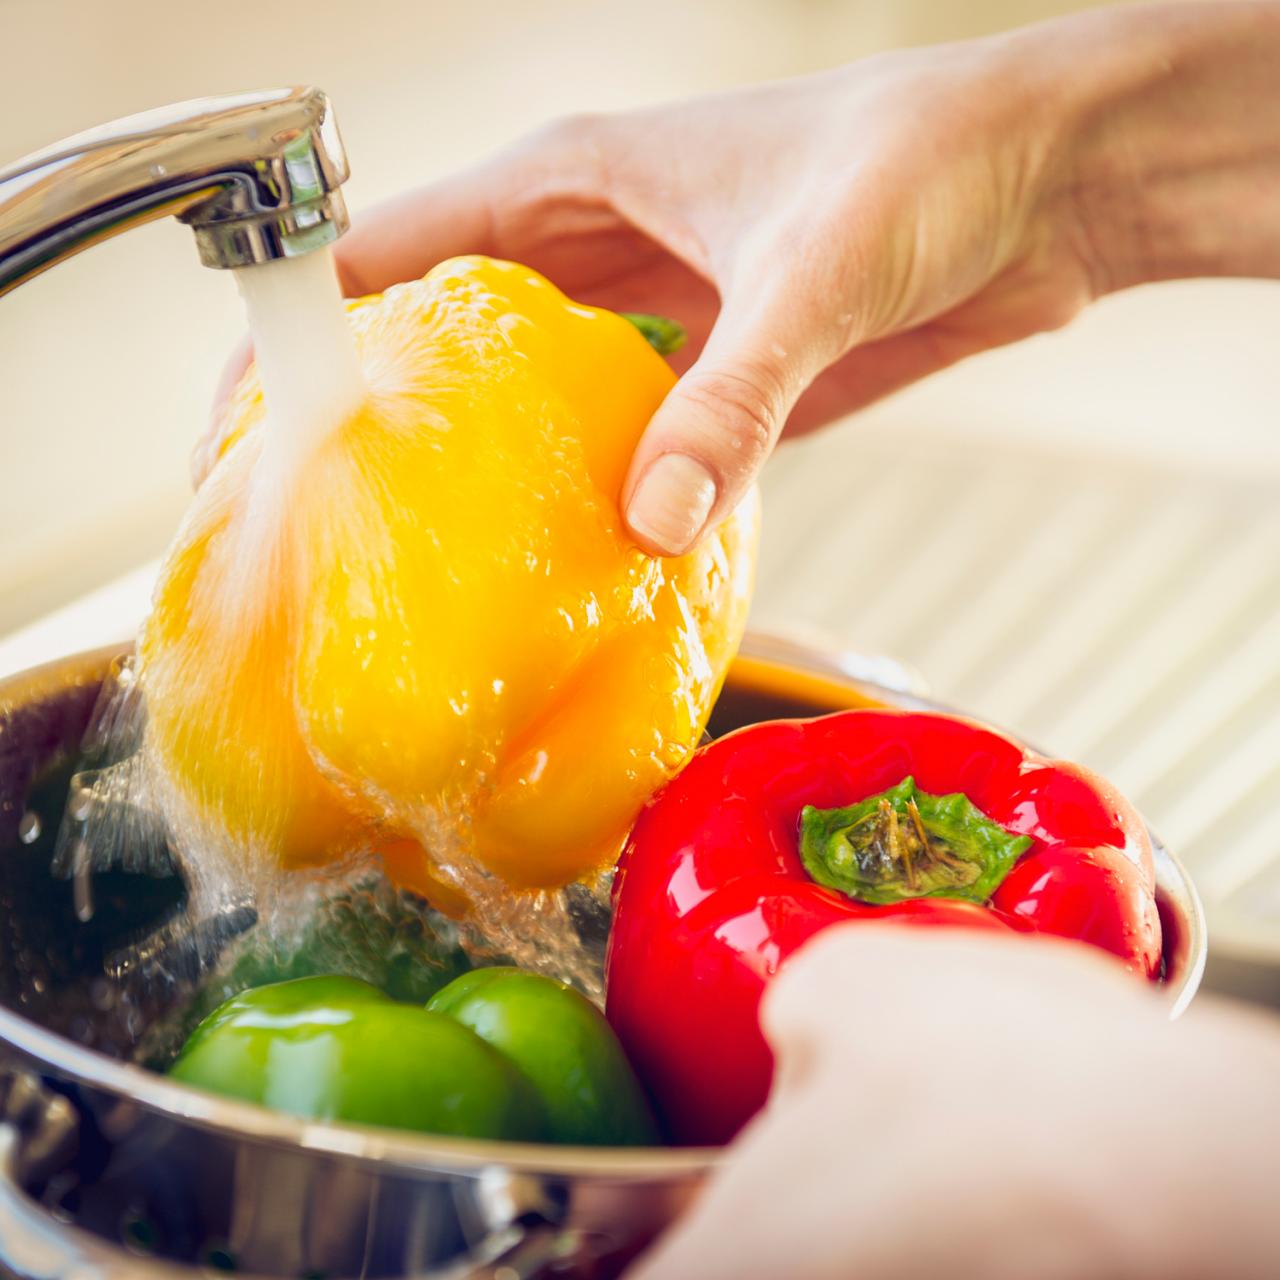 Fruit & Veggie Wash: 3 Easy-to-Follow Steps for Cleaner Produce